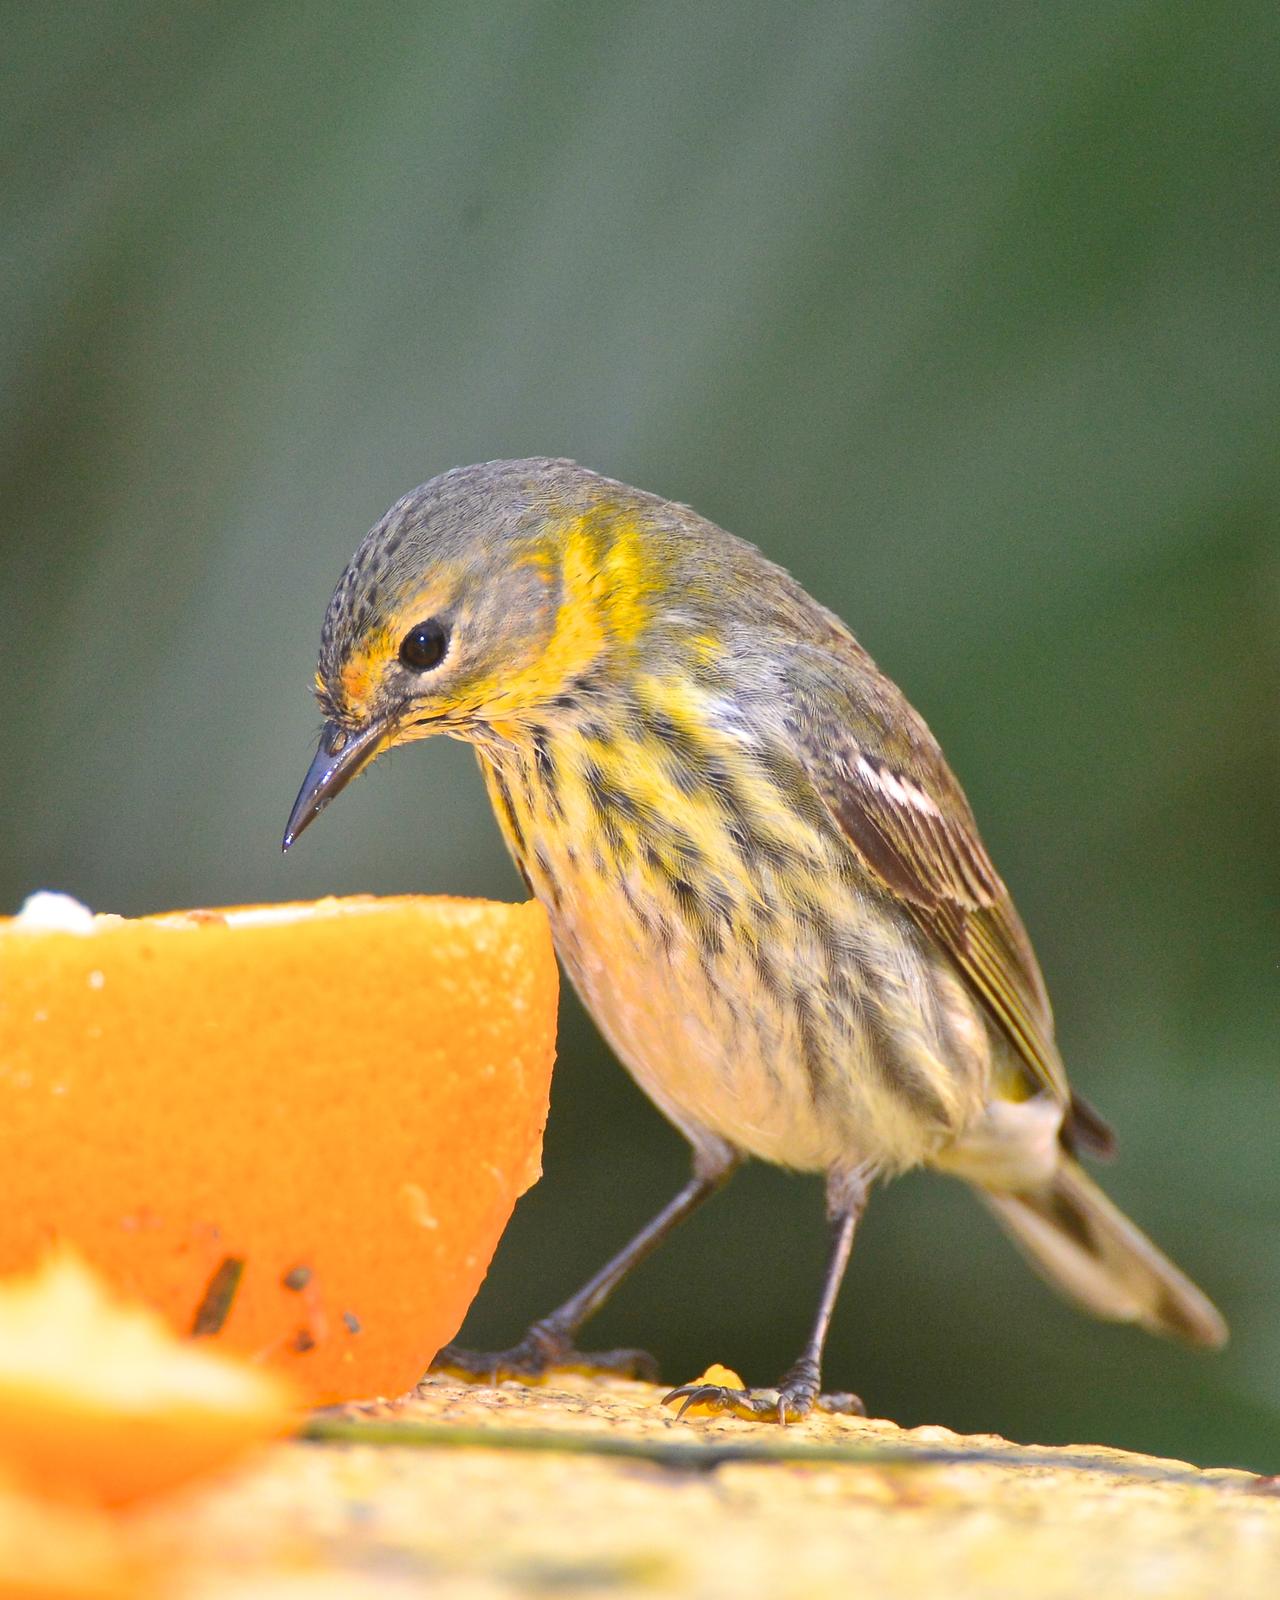 Cape May Warbler Photo by Gerald Friesen